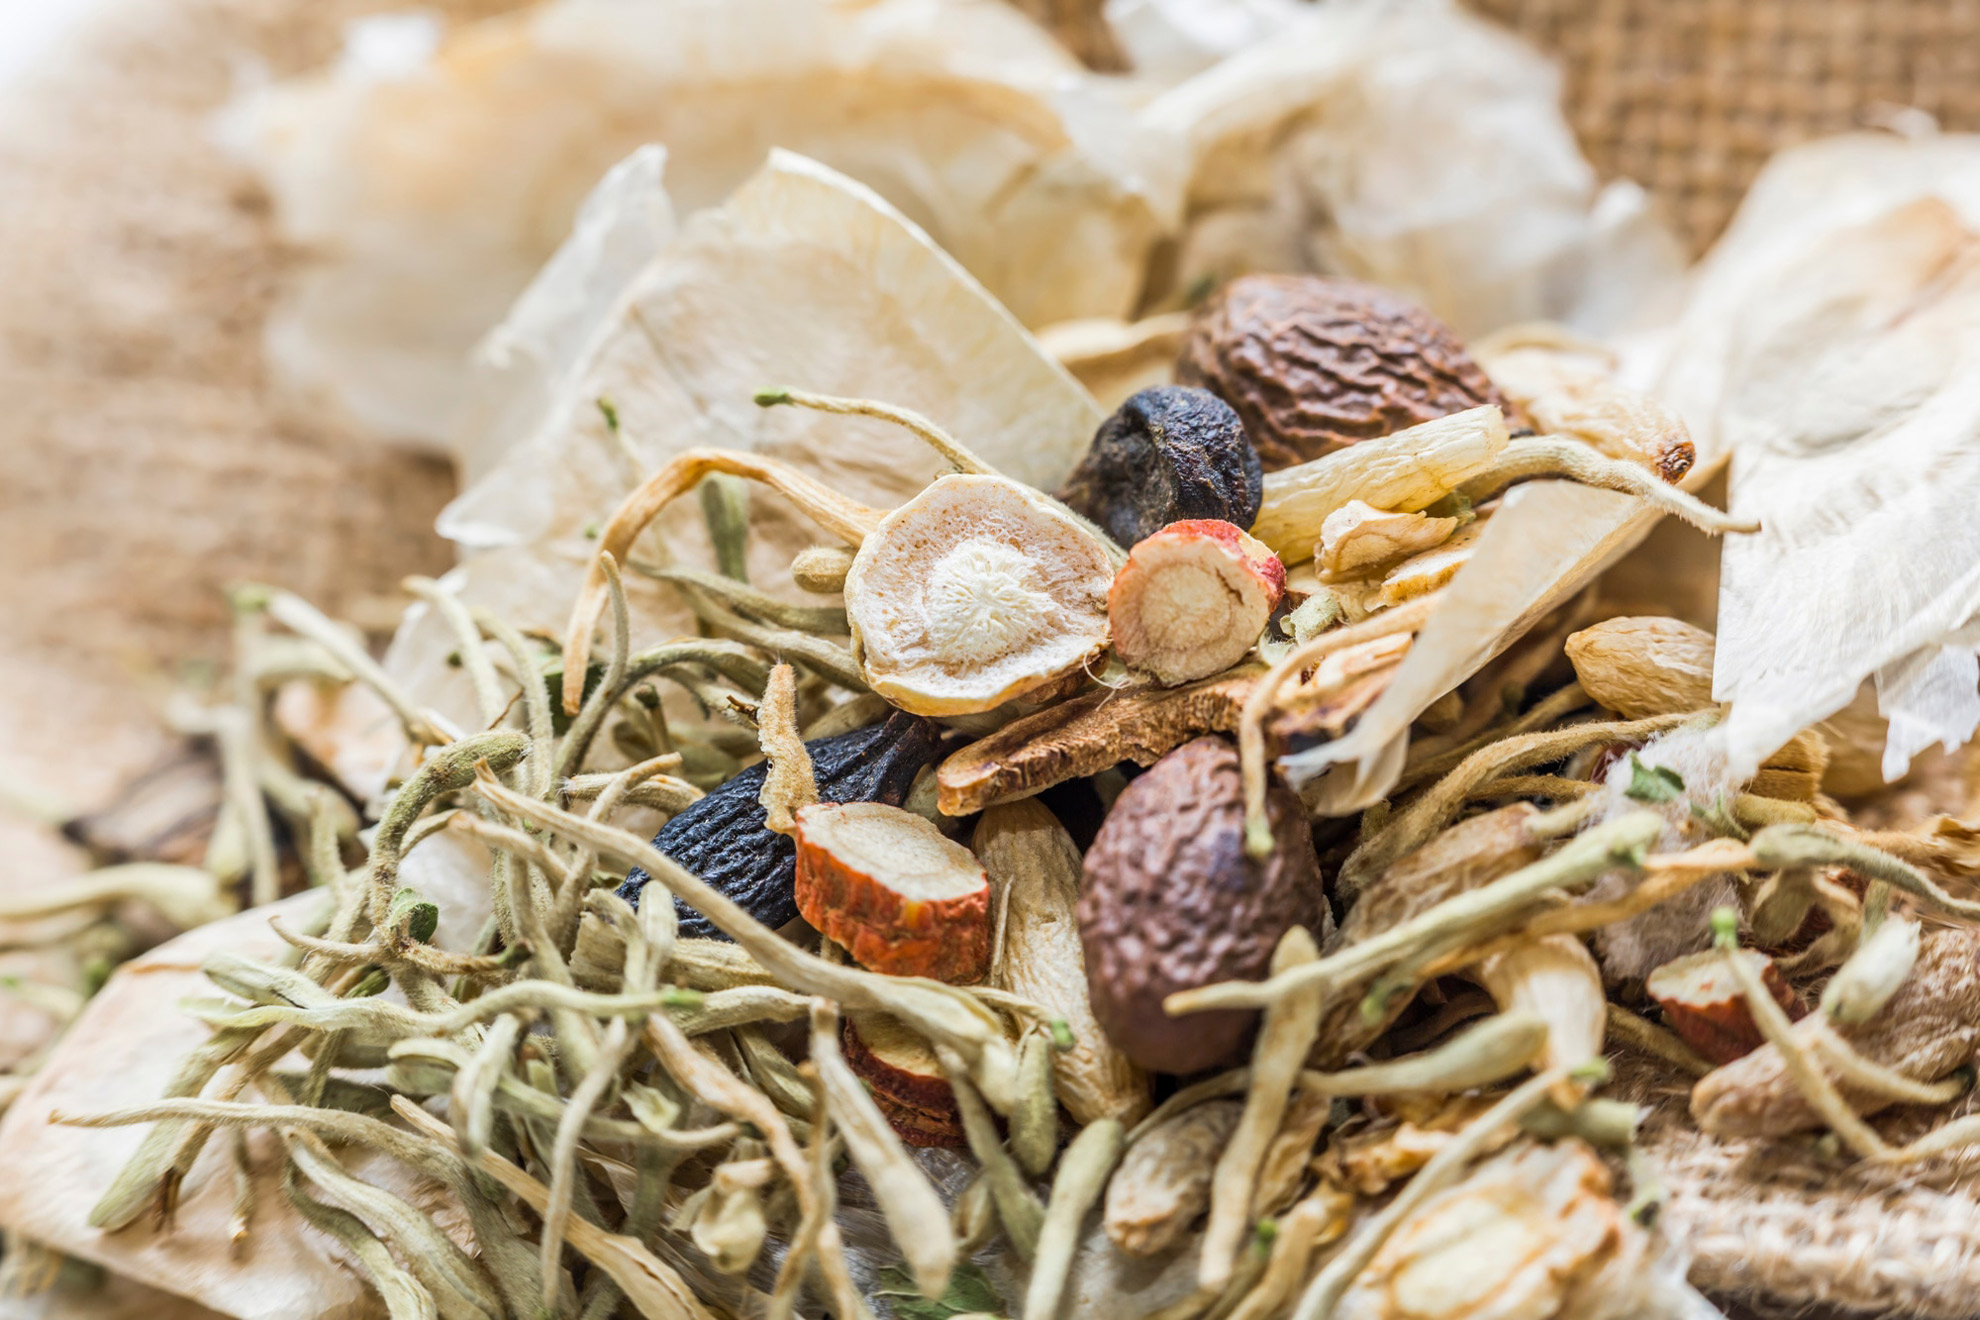 A photo of loose Chinese herbs